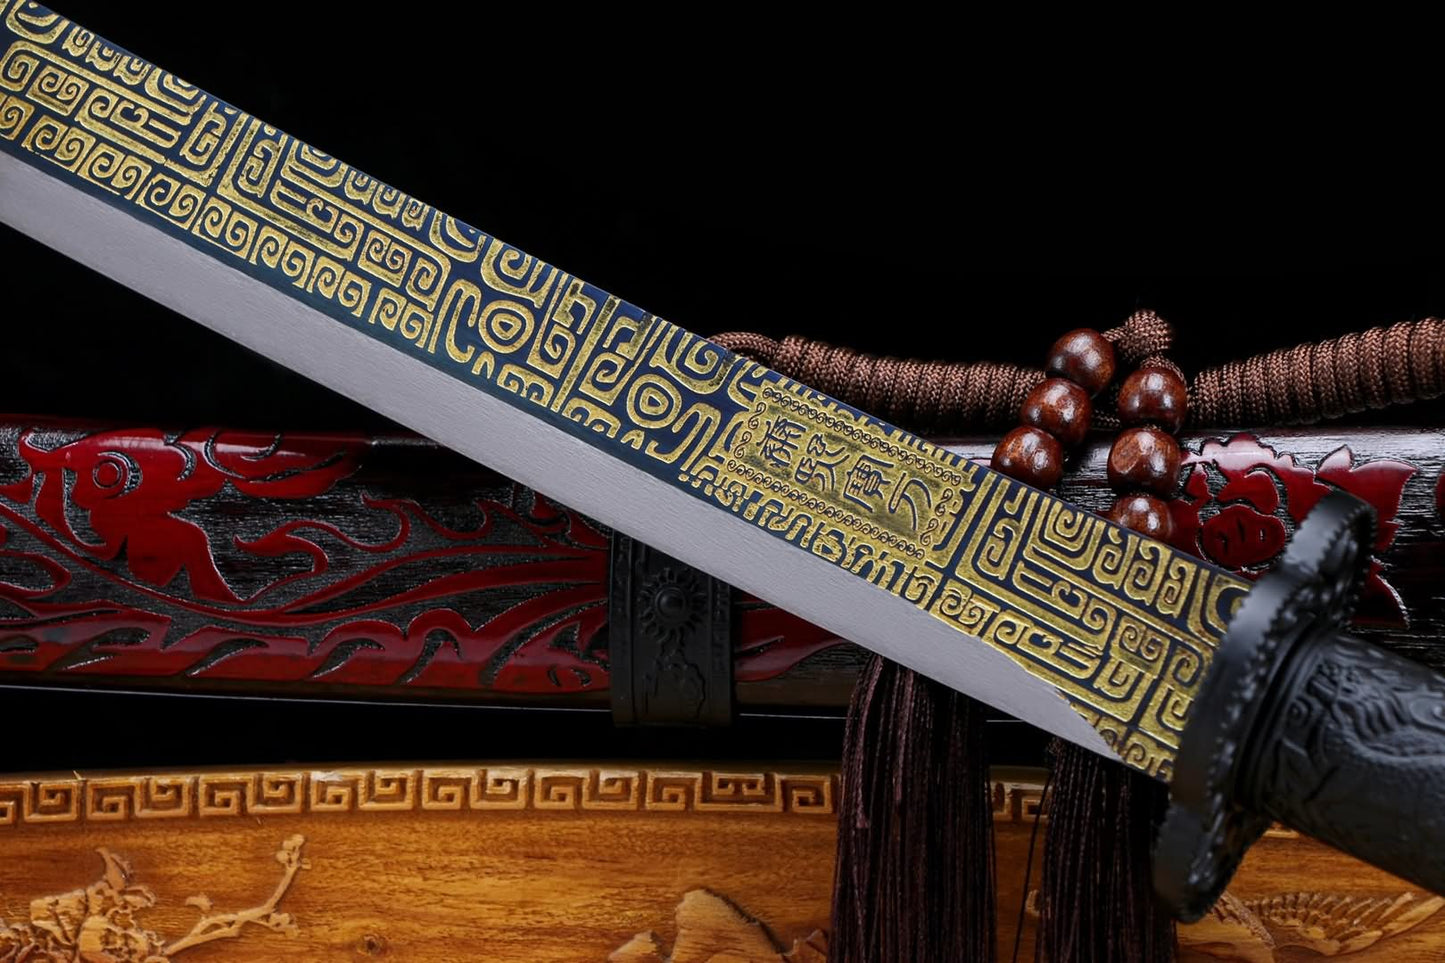 KANGXI Cut Horse dao,High Carbon Steel Blade,Solid Wood Carving Scabbard